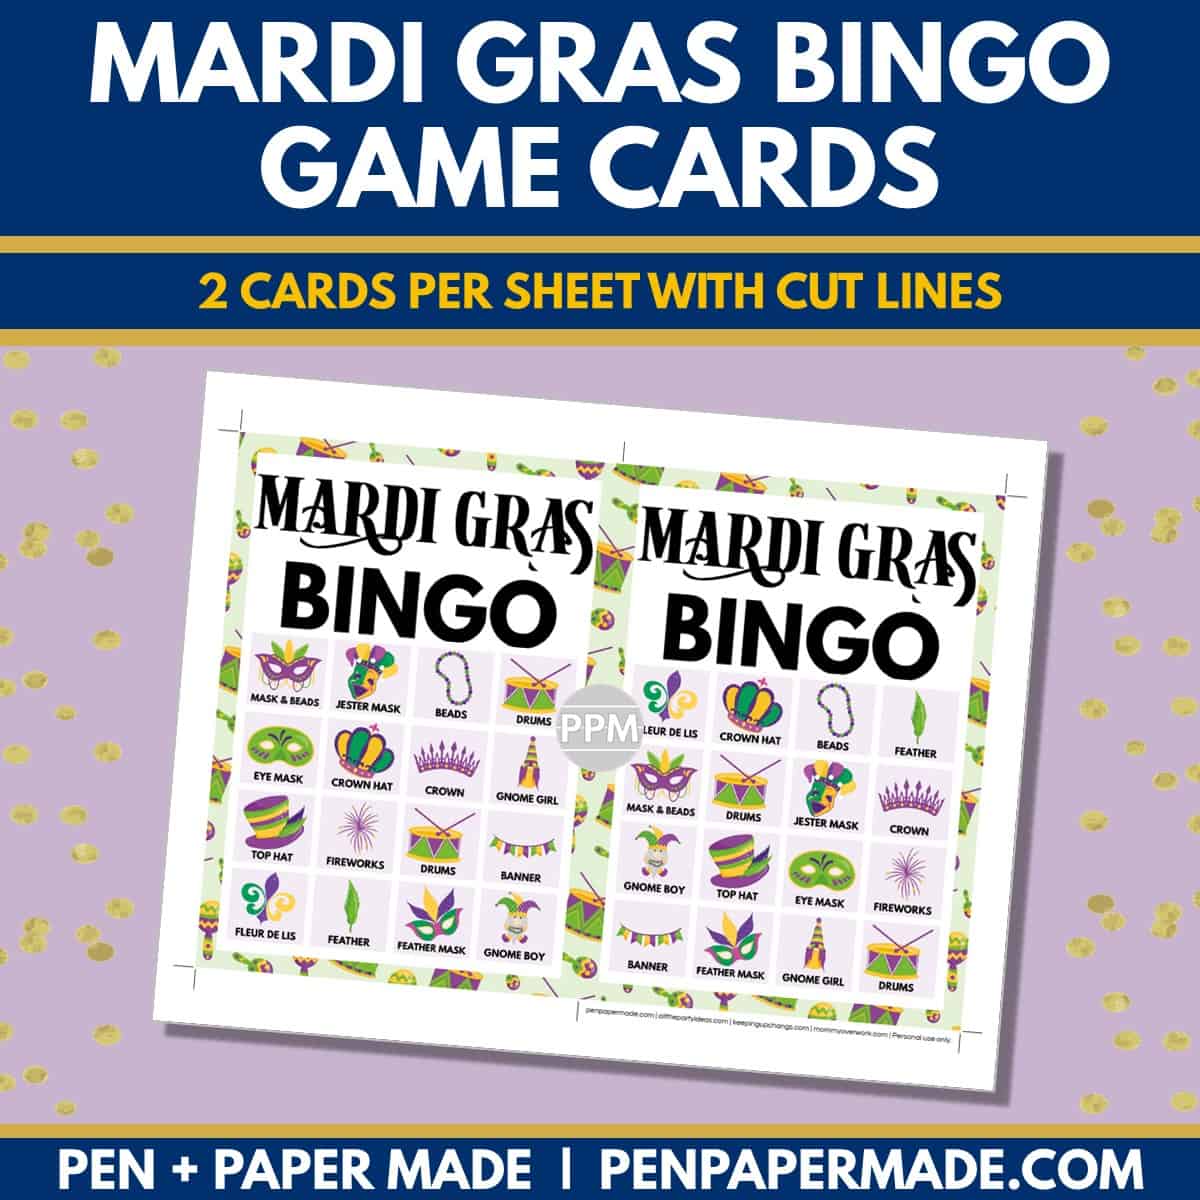 mardi gras bingo card 4x4 5x7 game boards with images and text words.